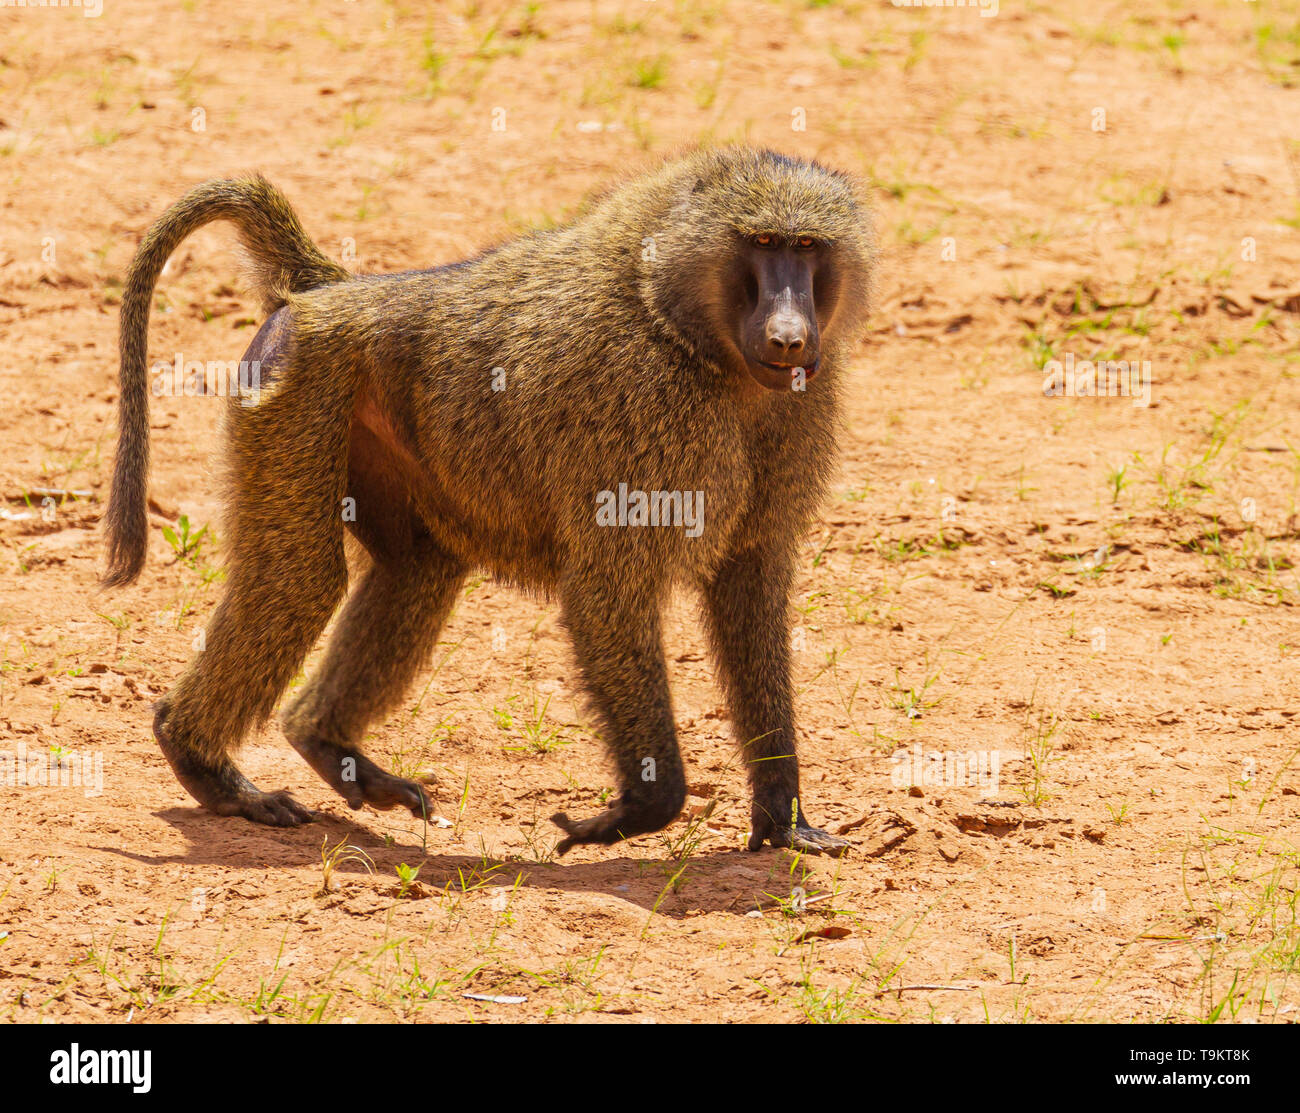 Olive baboon, anubis baboon, Papio anubis, close-up side view face body , on dry earth sand, Samburu National Reserve, Kenya, East Africa injured figh Stock Photo